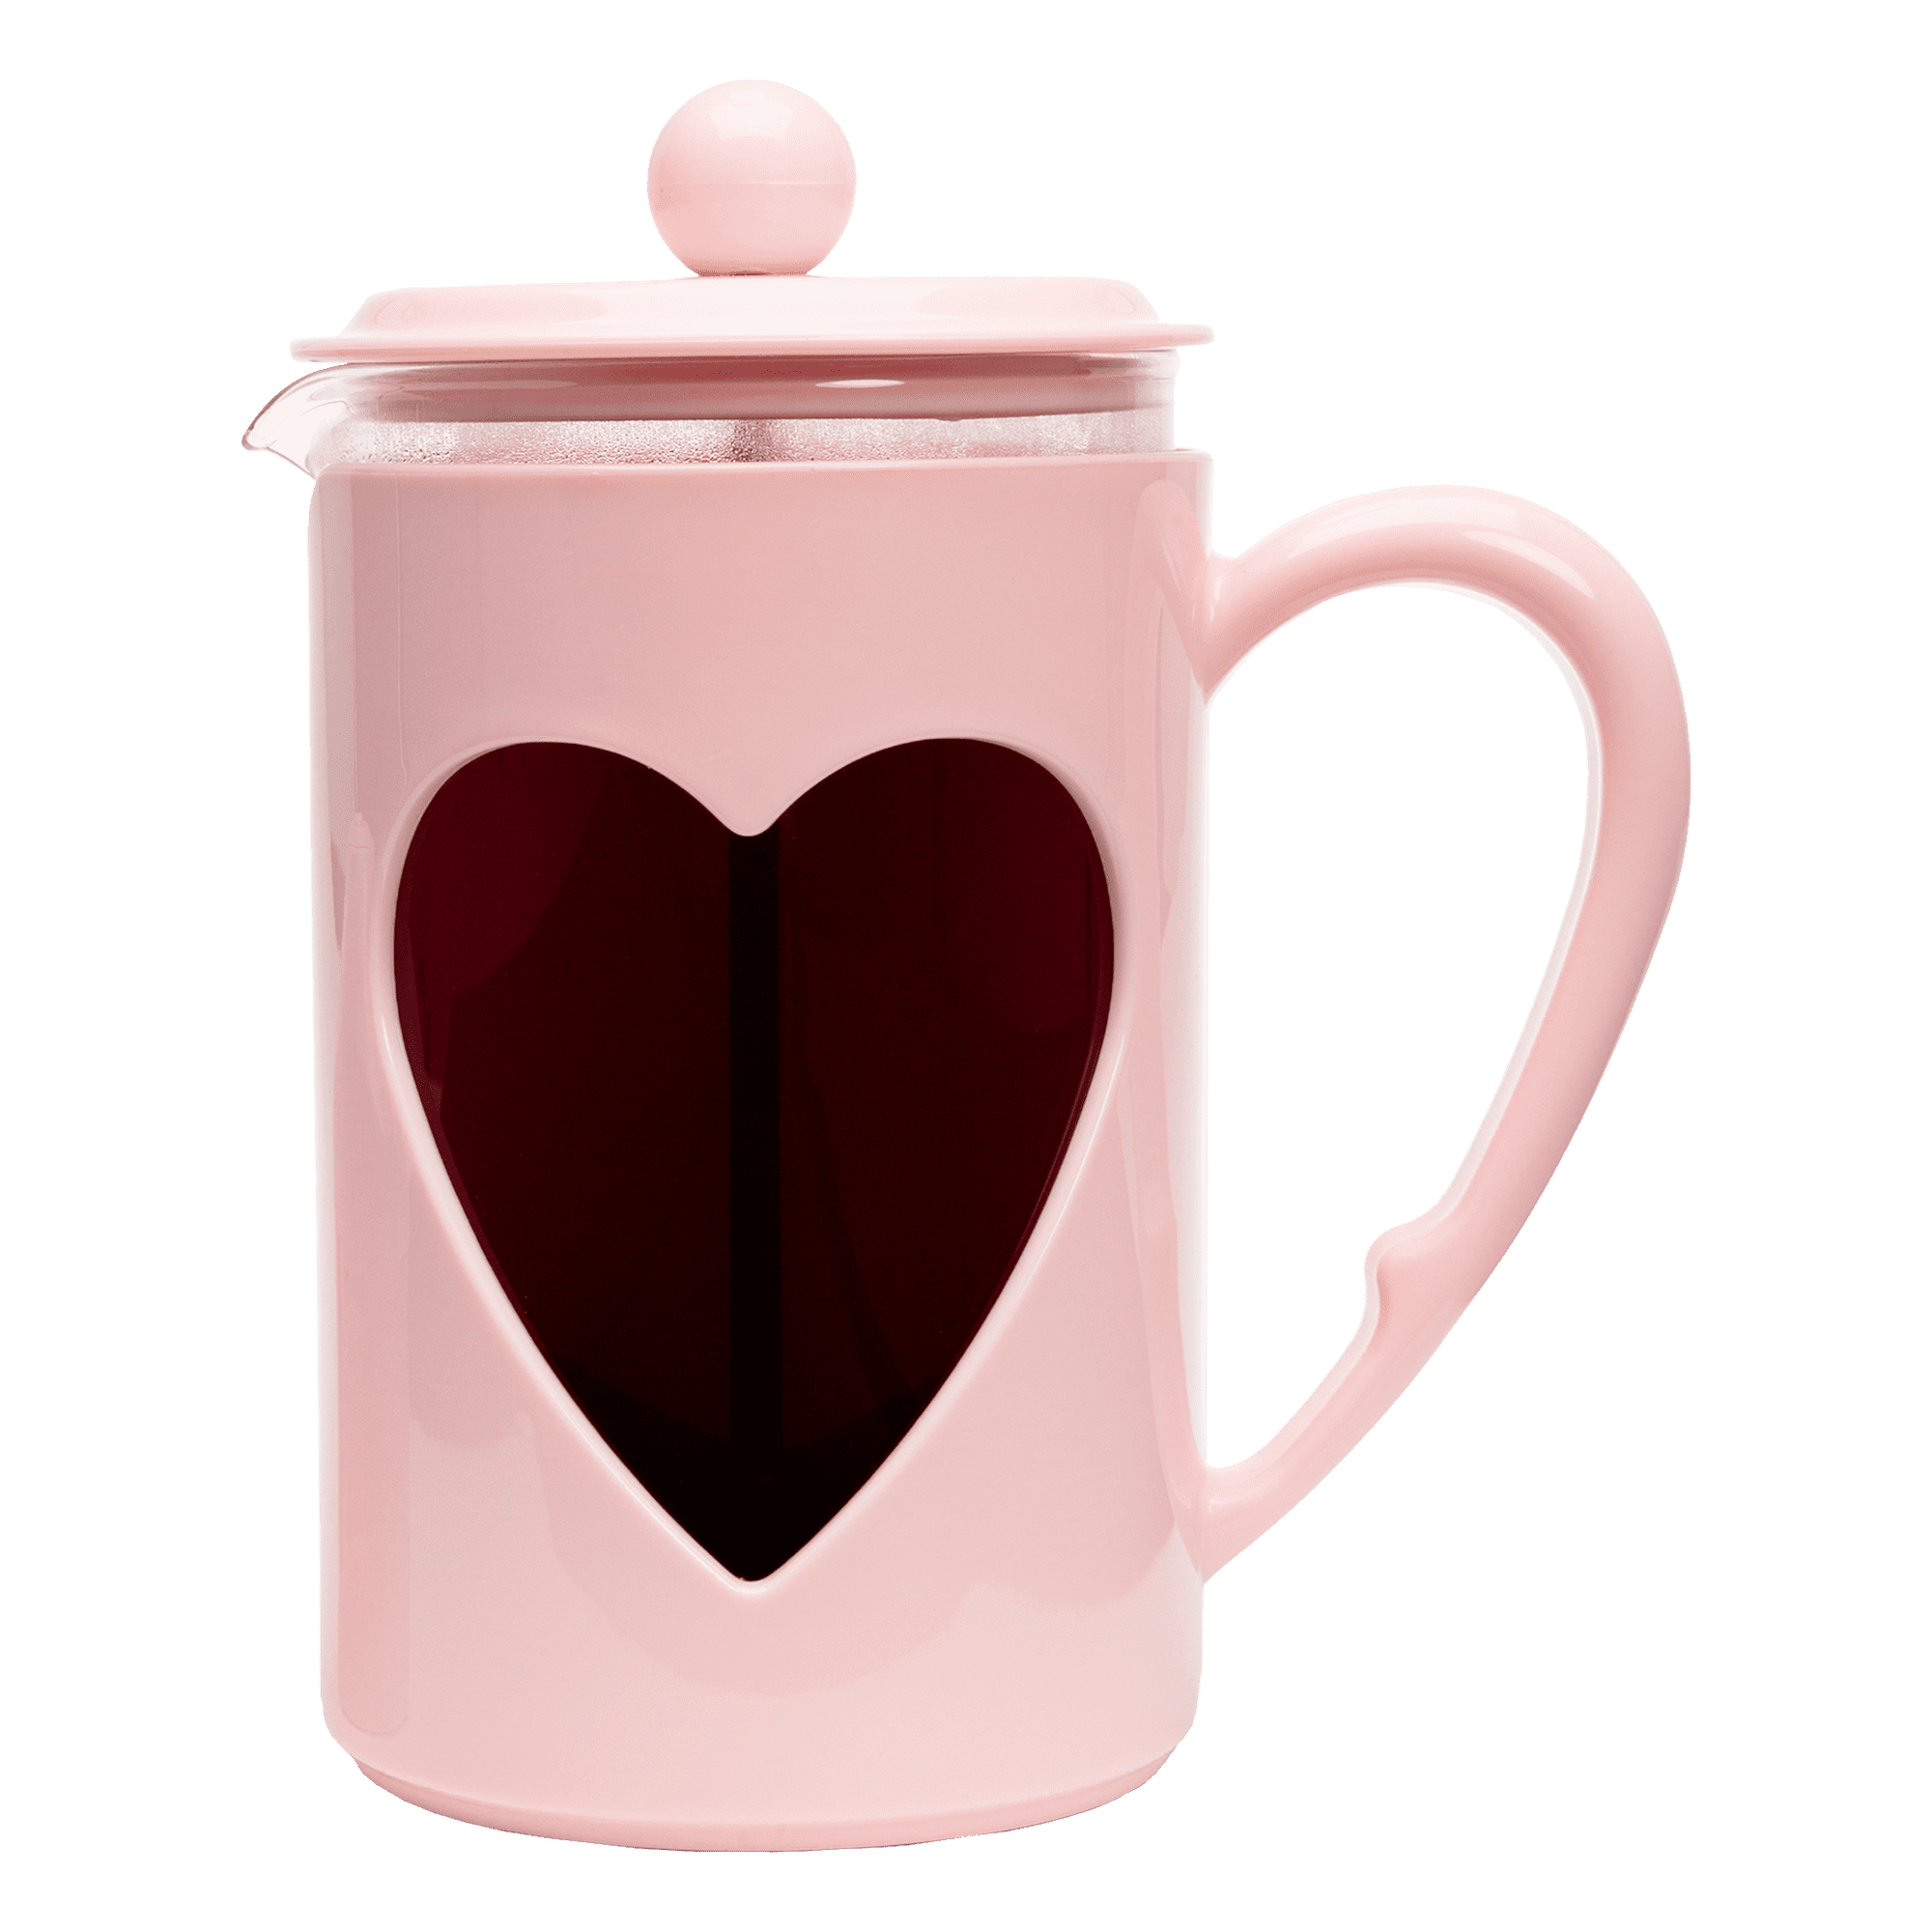 Paris Hilton Hearts 16oz Ceramic Coffee Mug and Electric Milk Frother Set - Battery Powered, 2-Pieces, Pink